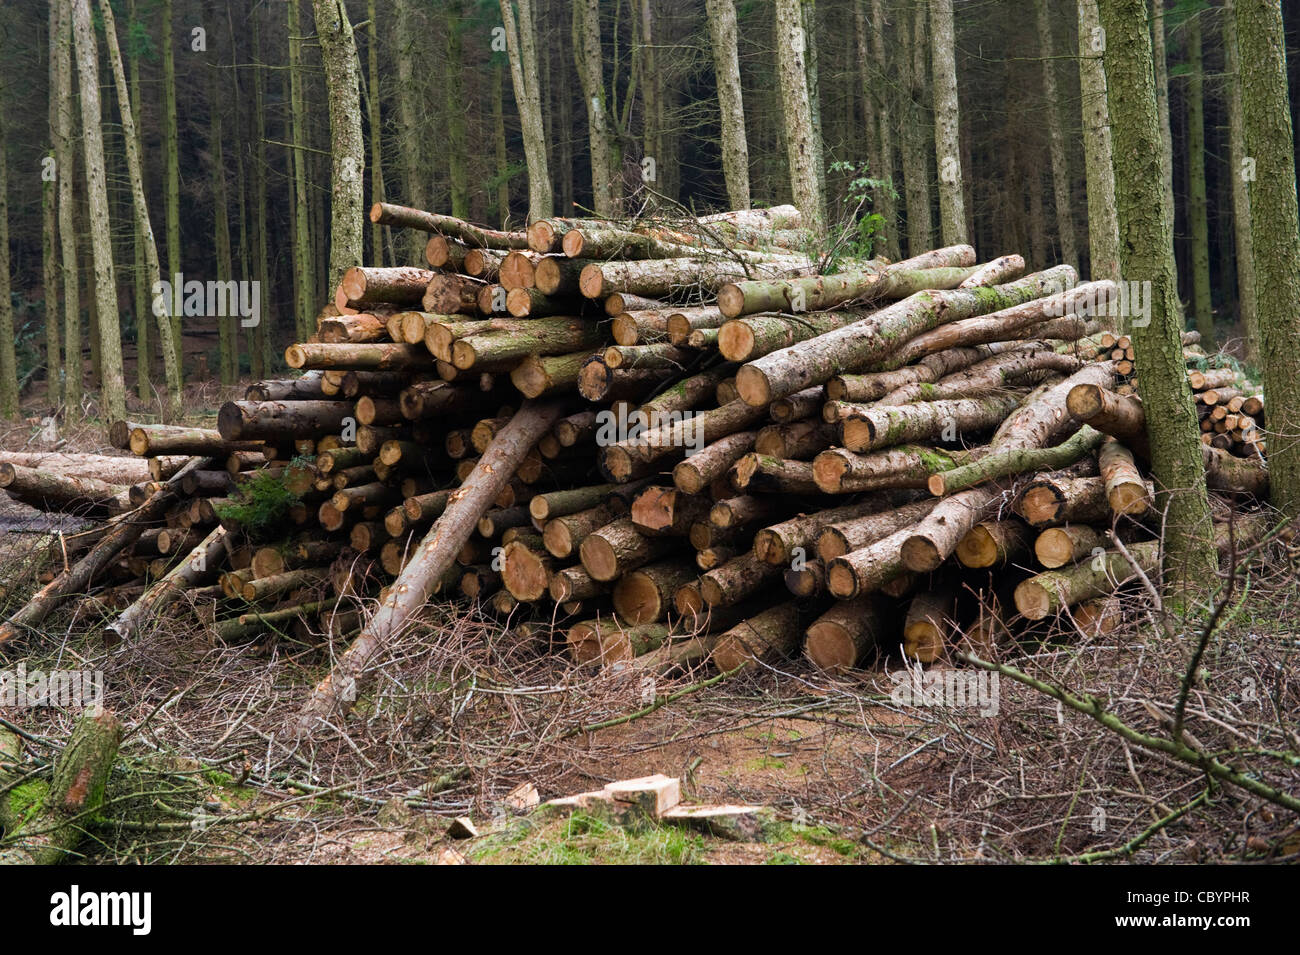 Woodland tree felling in the Brecon Beacons National Park to prevent spread of larch conifer disease Phytophthora ramorum Stock Photo